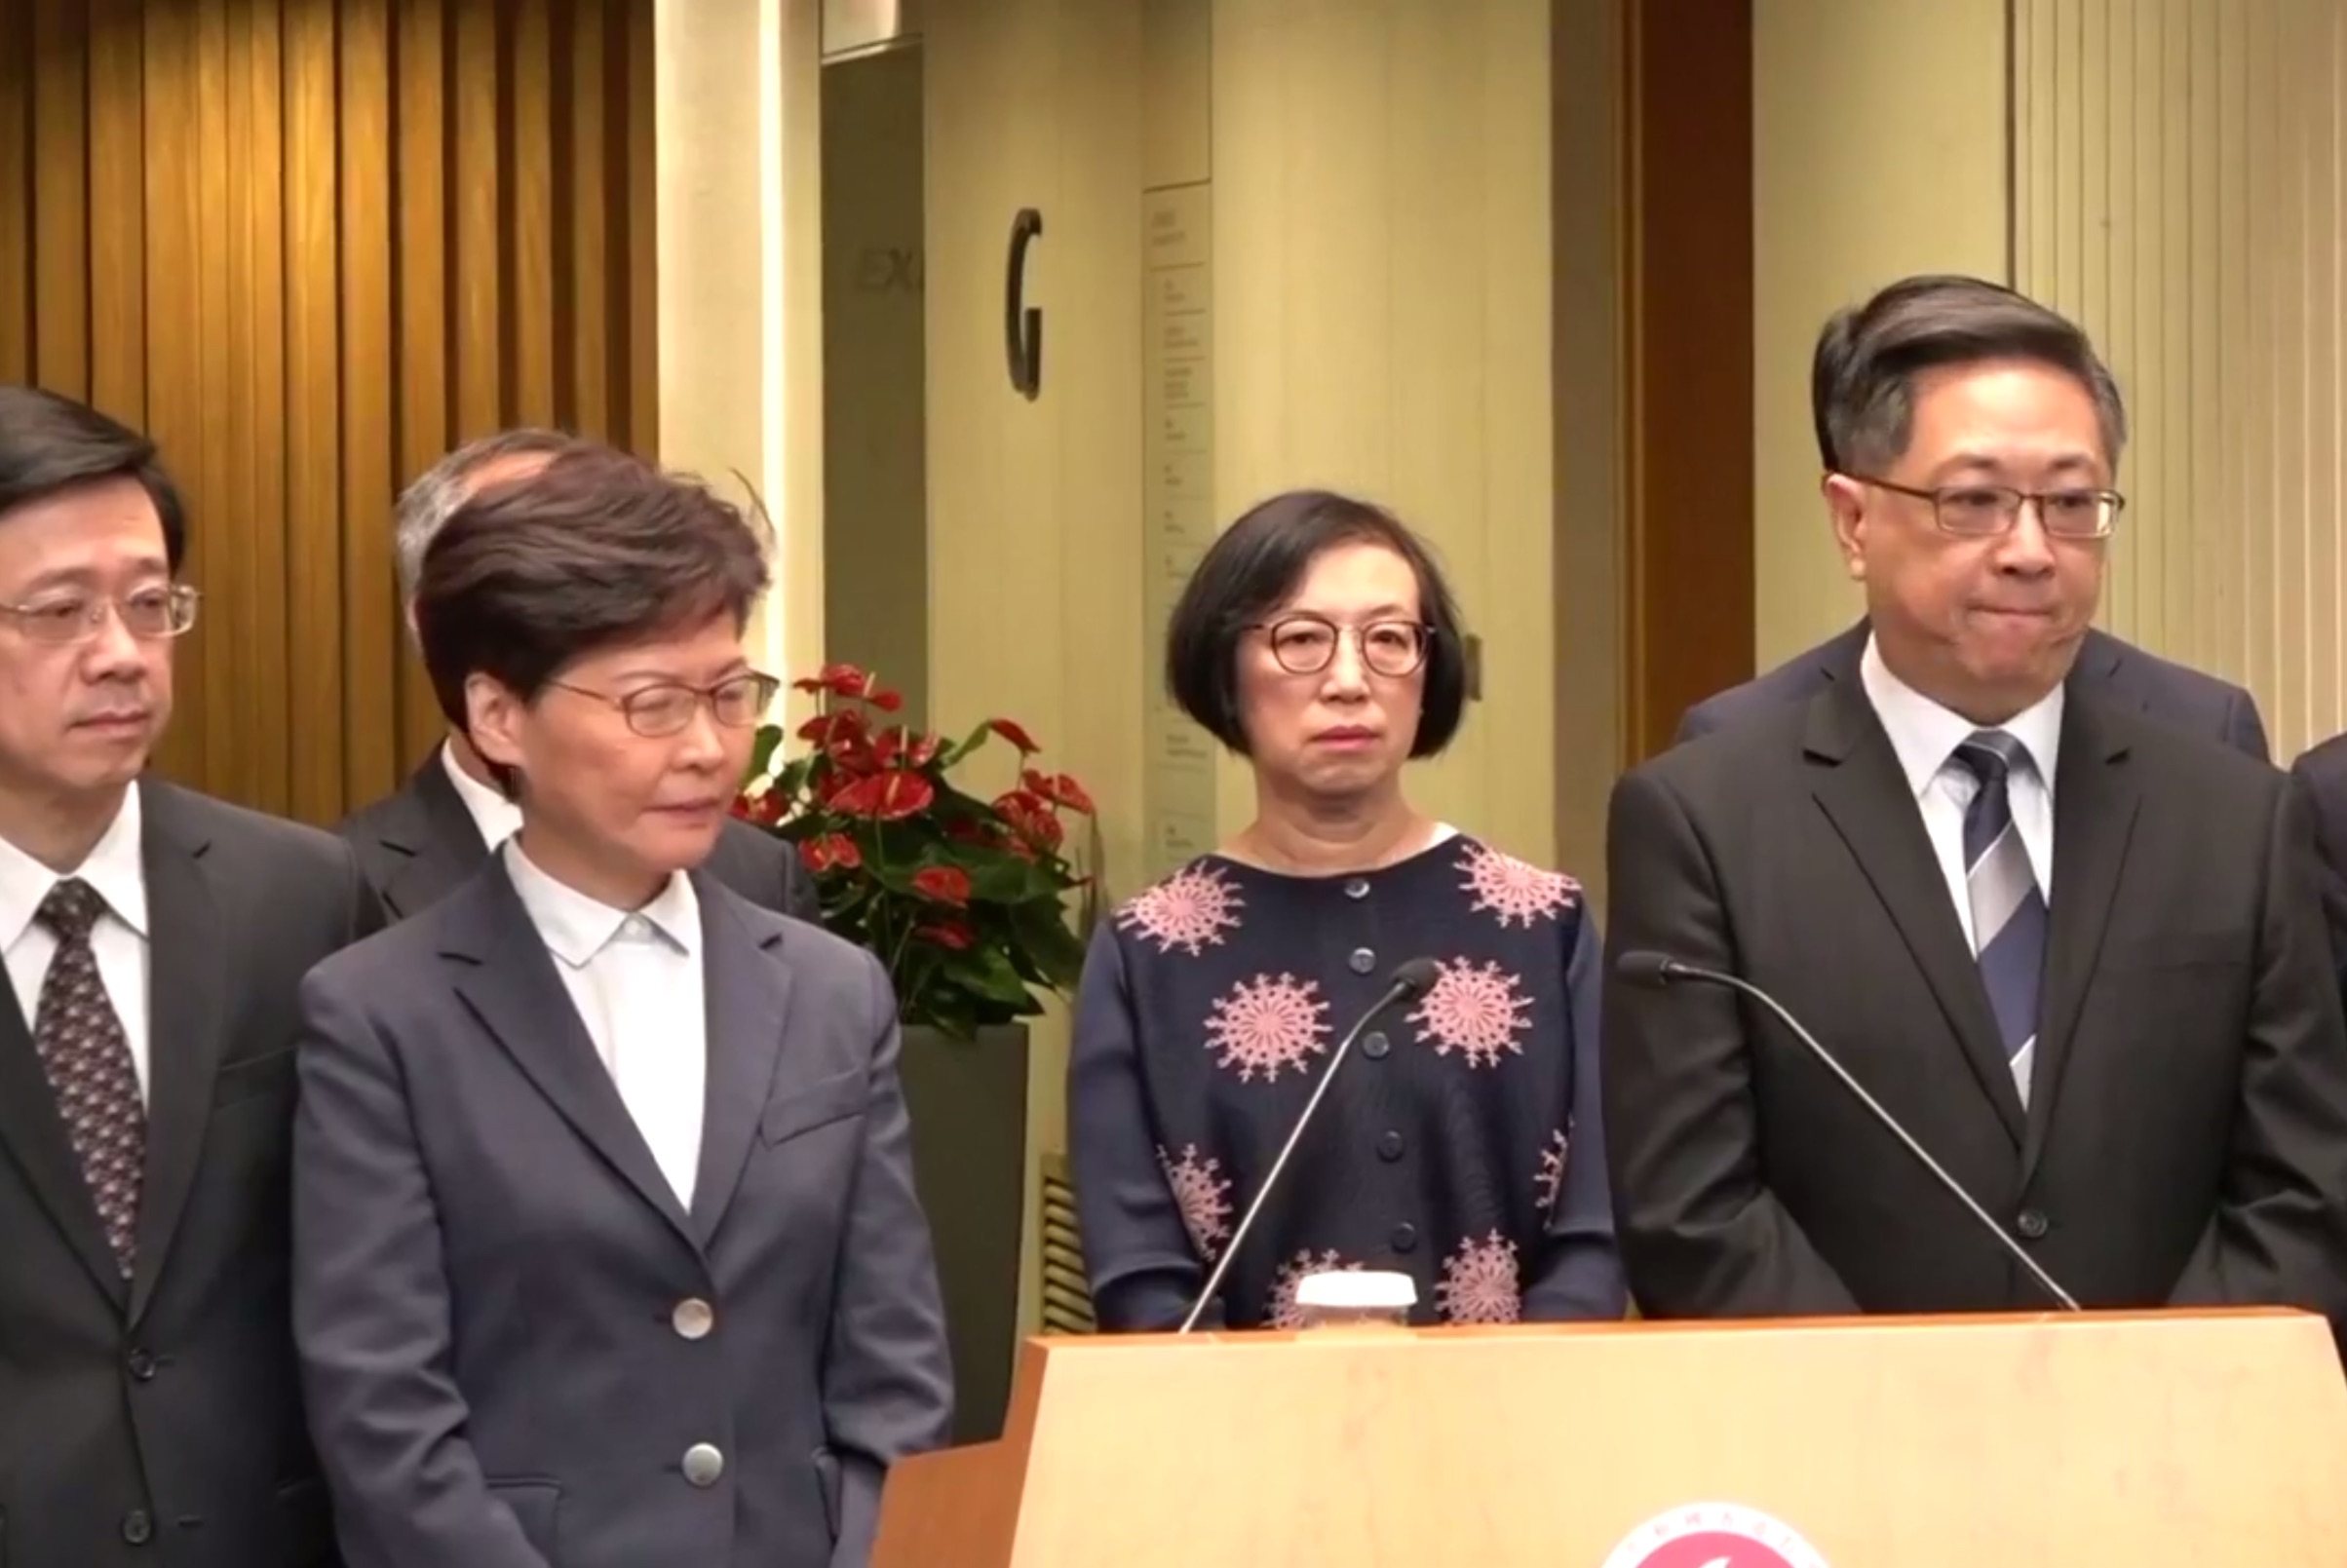 Security Secretary John Lee (left), Chief Executive Carrie Lam (second left), and Police Commissioner Stephen Lo (far right) face the press this afternoon. Screengrab via RTHK video.